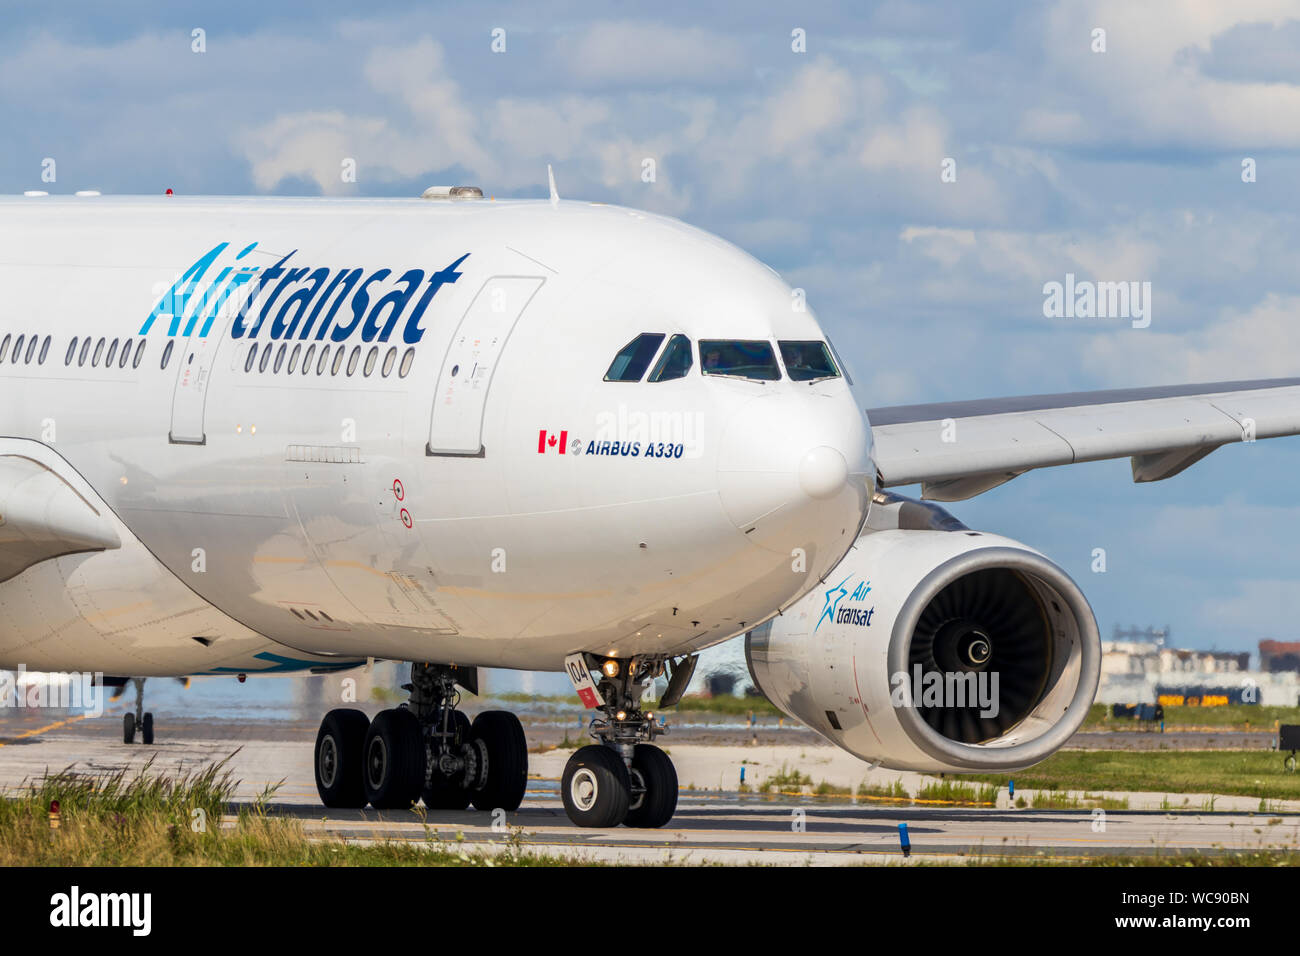 Air Transat Airbus A330 on taxiway at Toronto Pearson Intl. Airport. Stock Photo